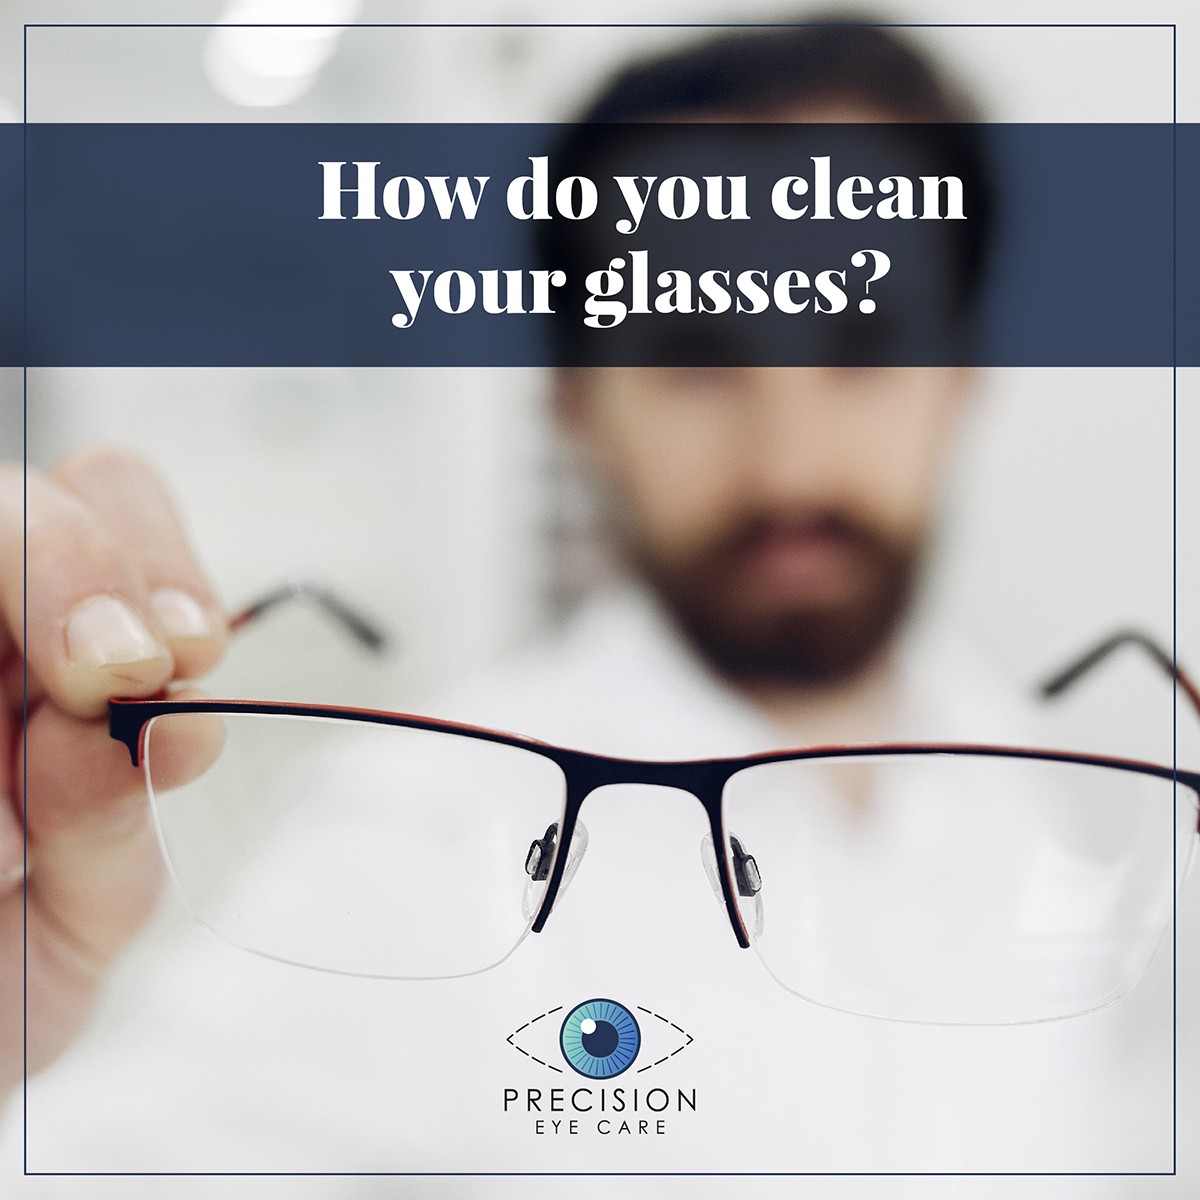 How do you clean your glasses?